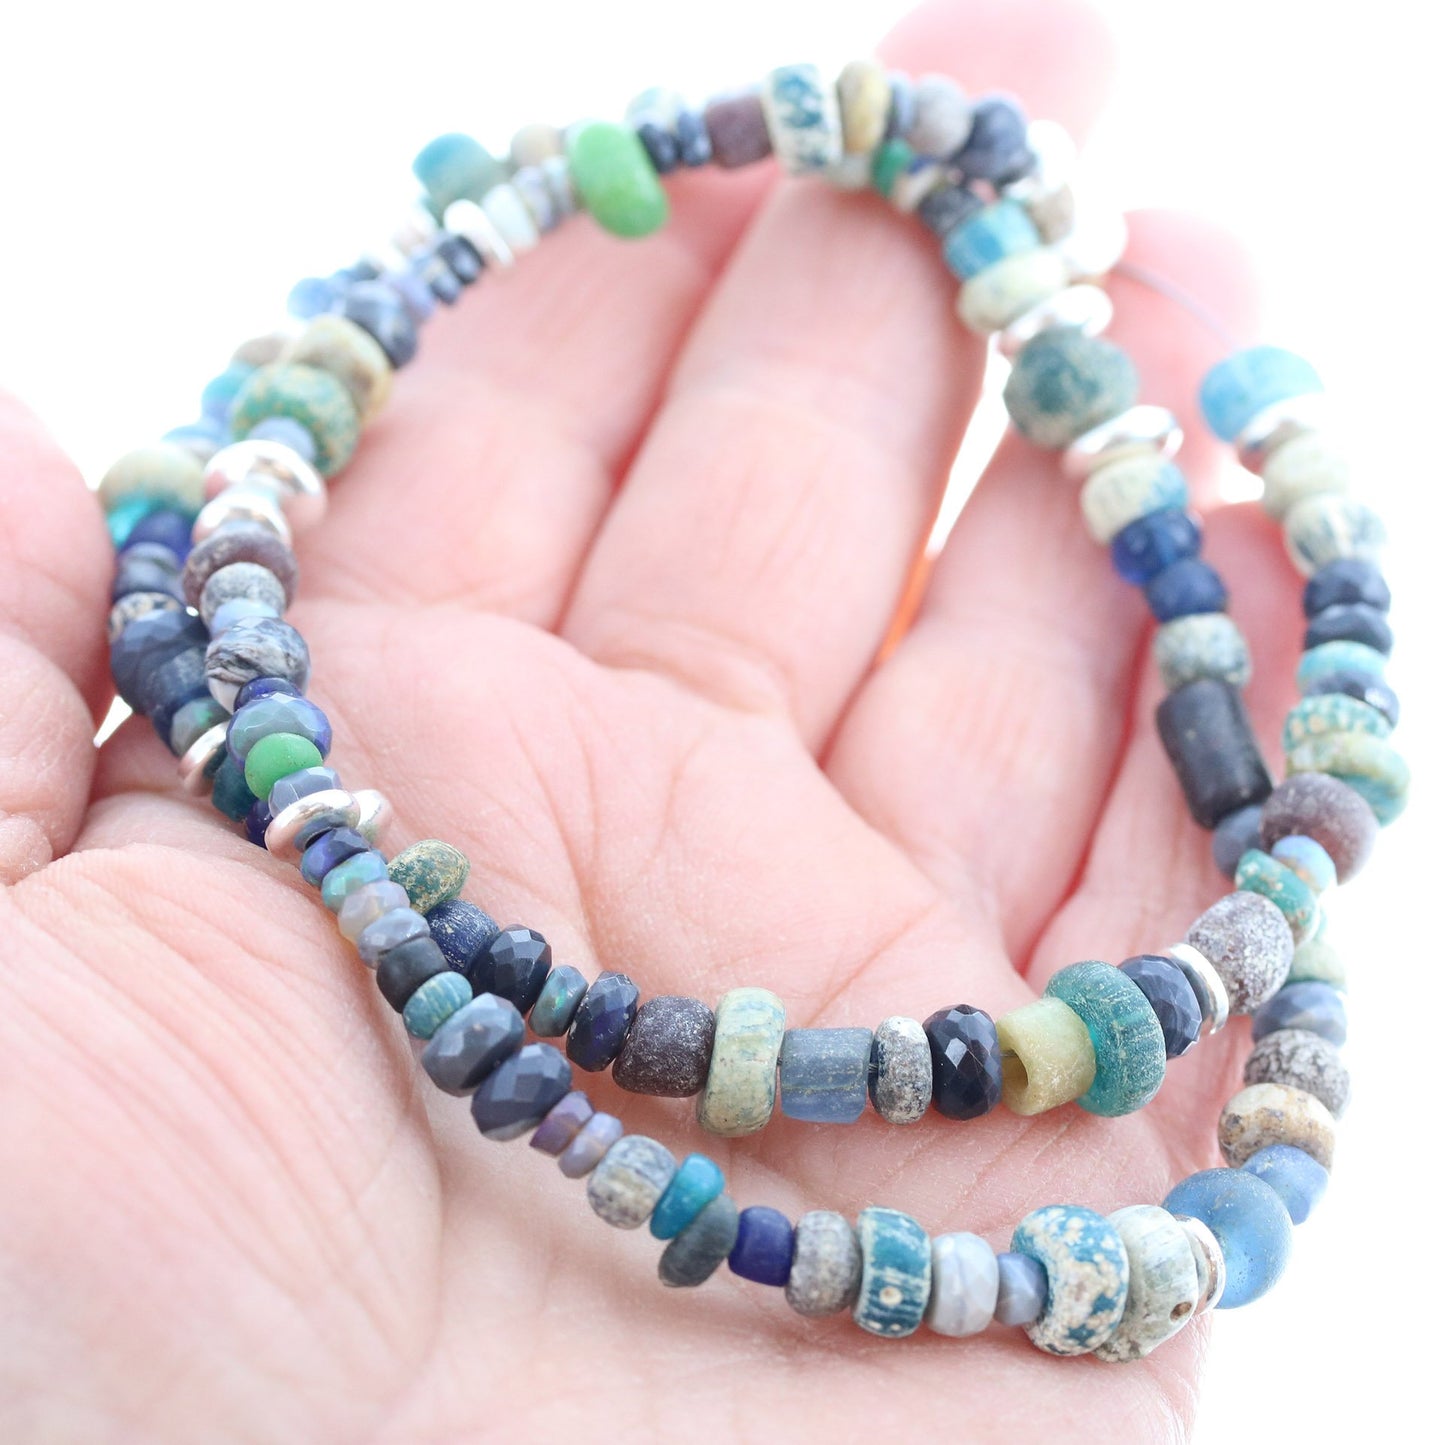 Ancient Mali Dig Beads Necklace Sterling And Black Opals